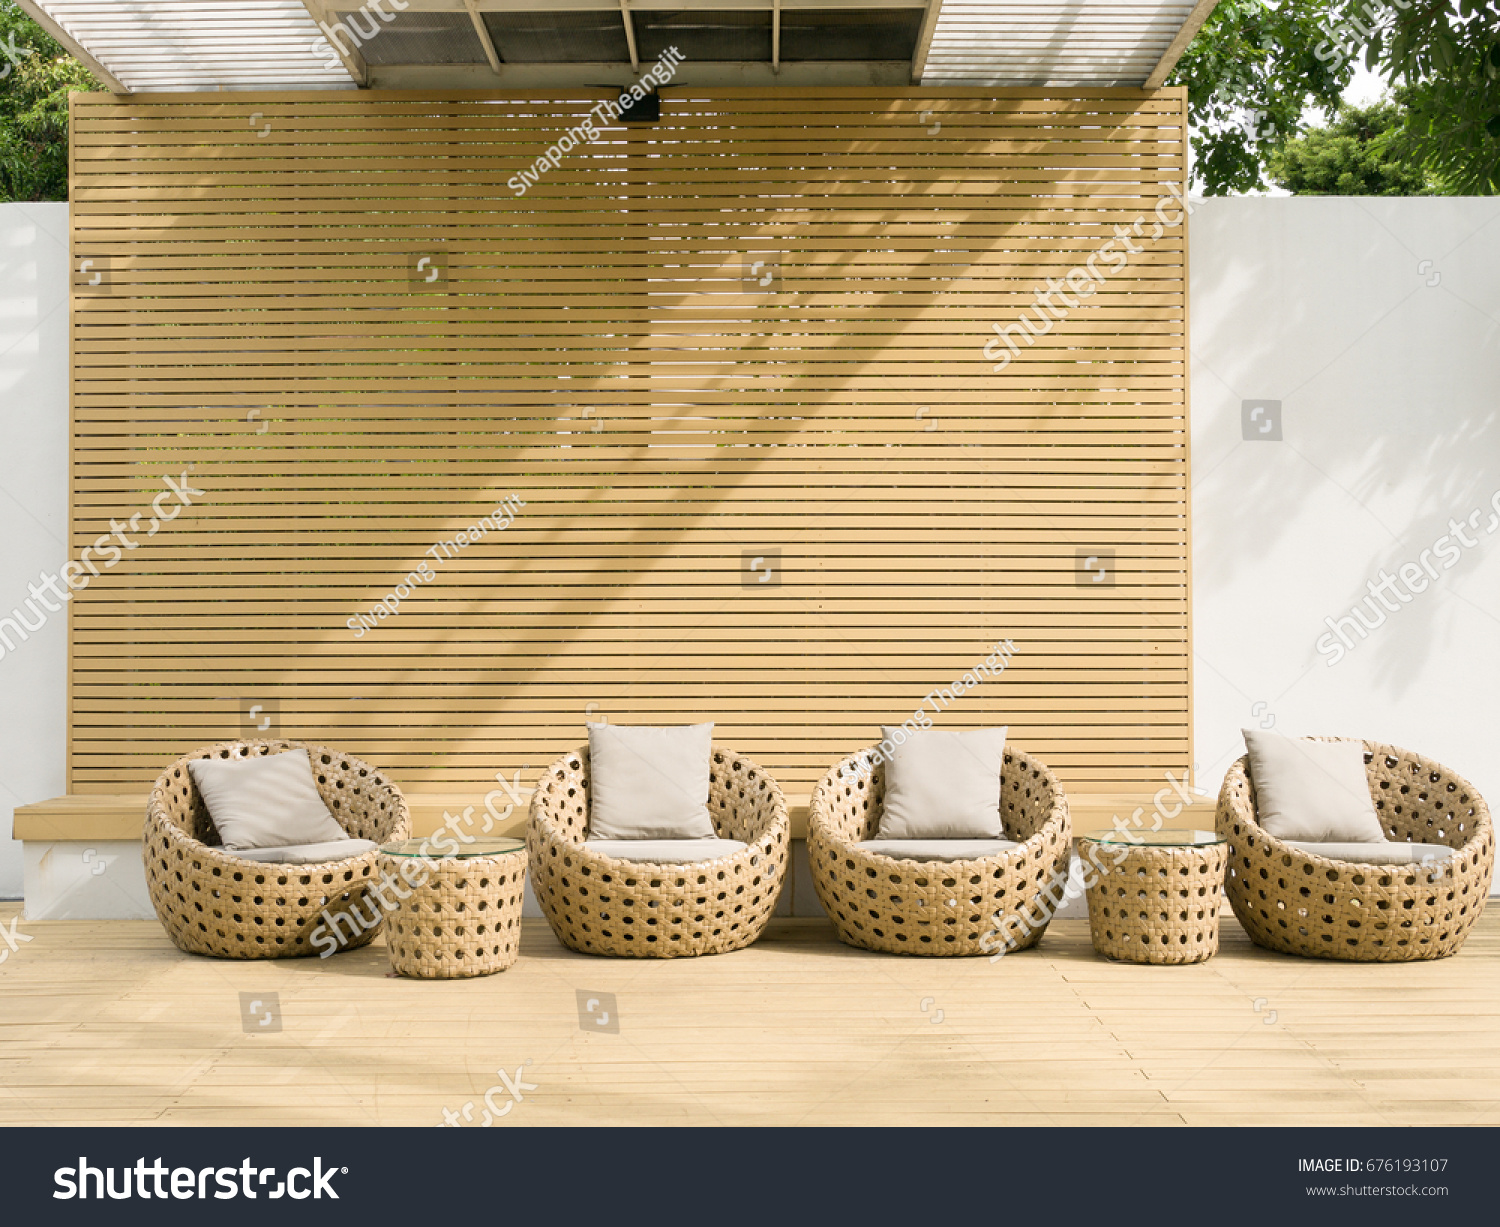 Outdoor relaxing space with trees around and rattan furniture #676193107